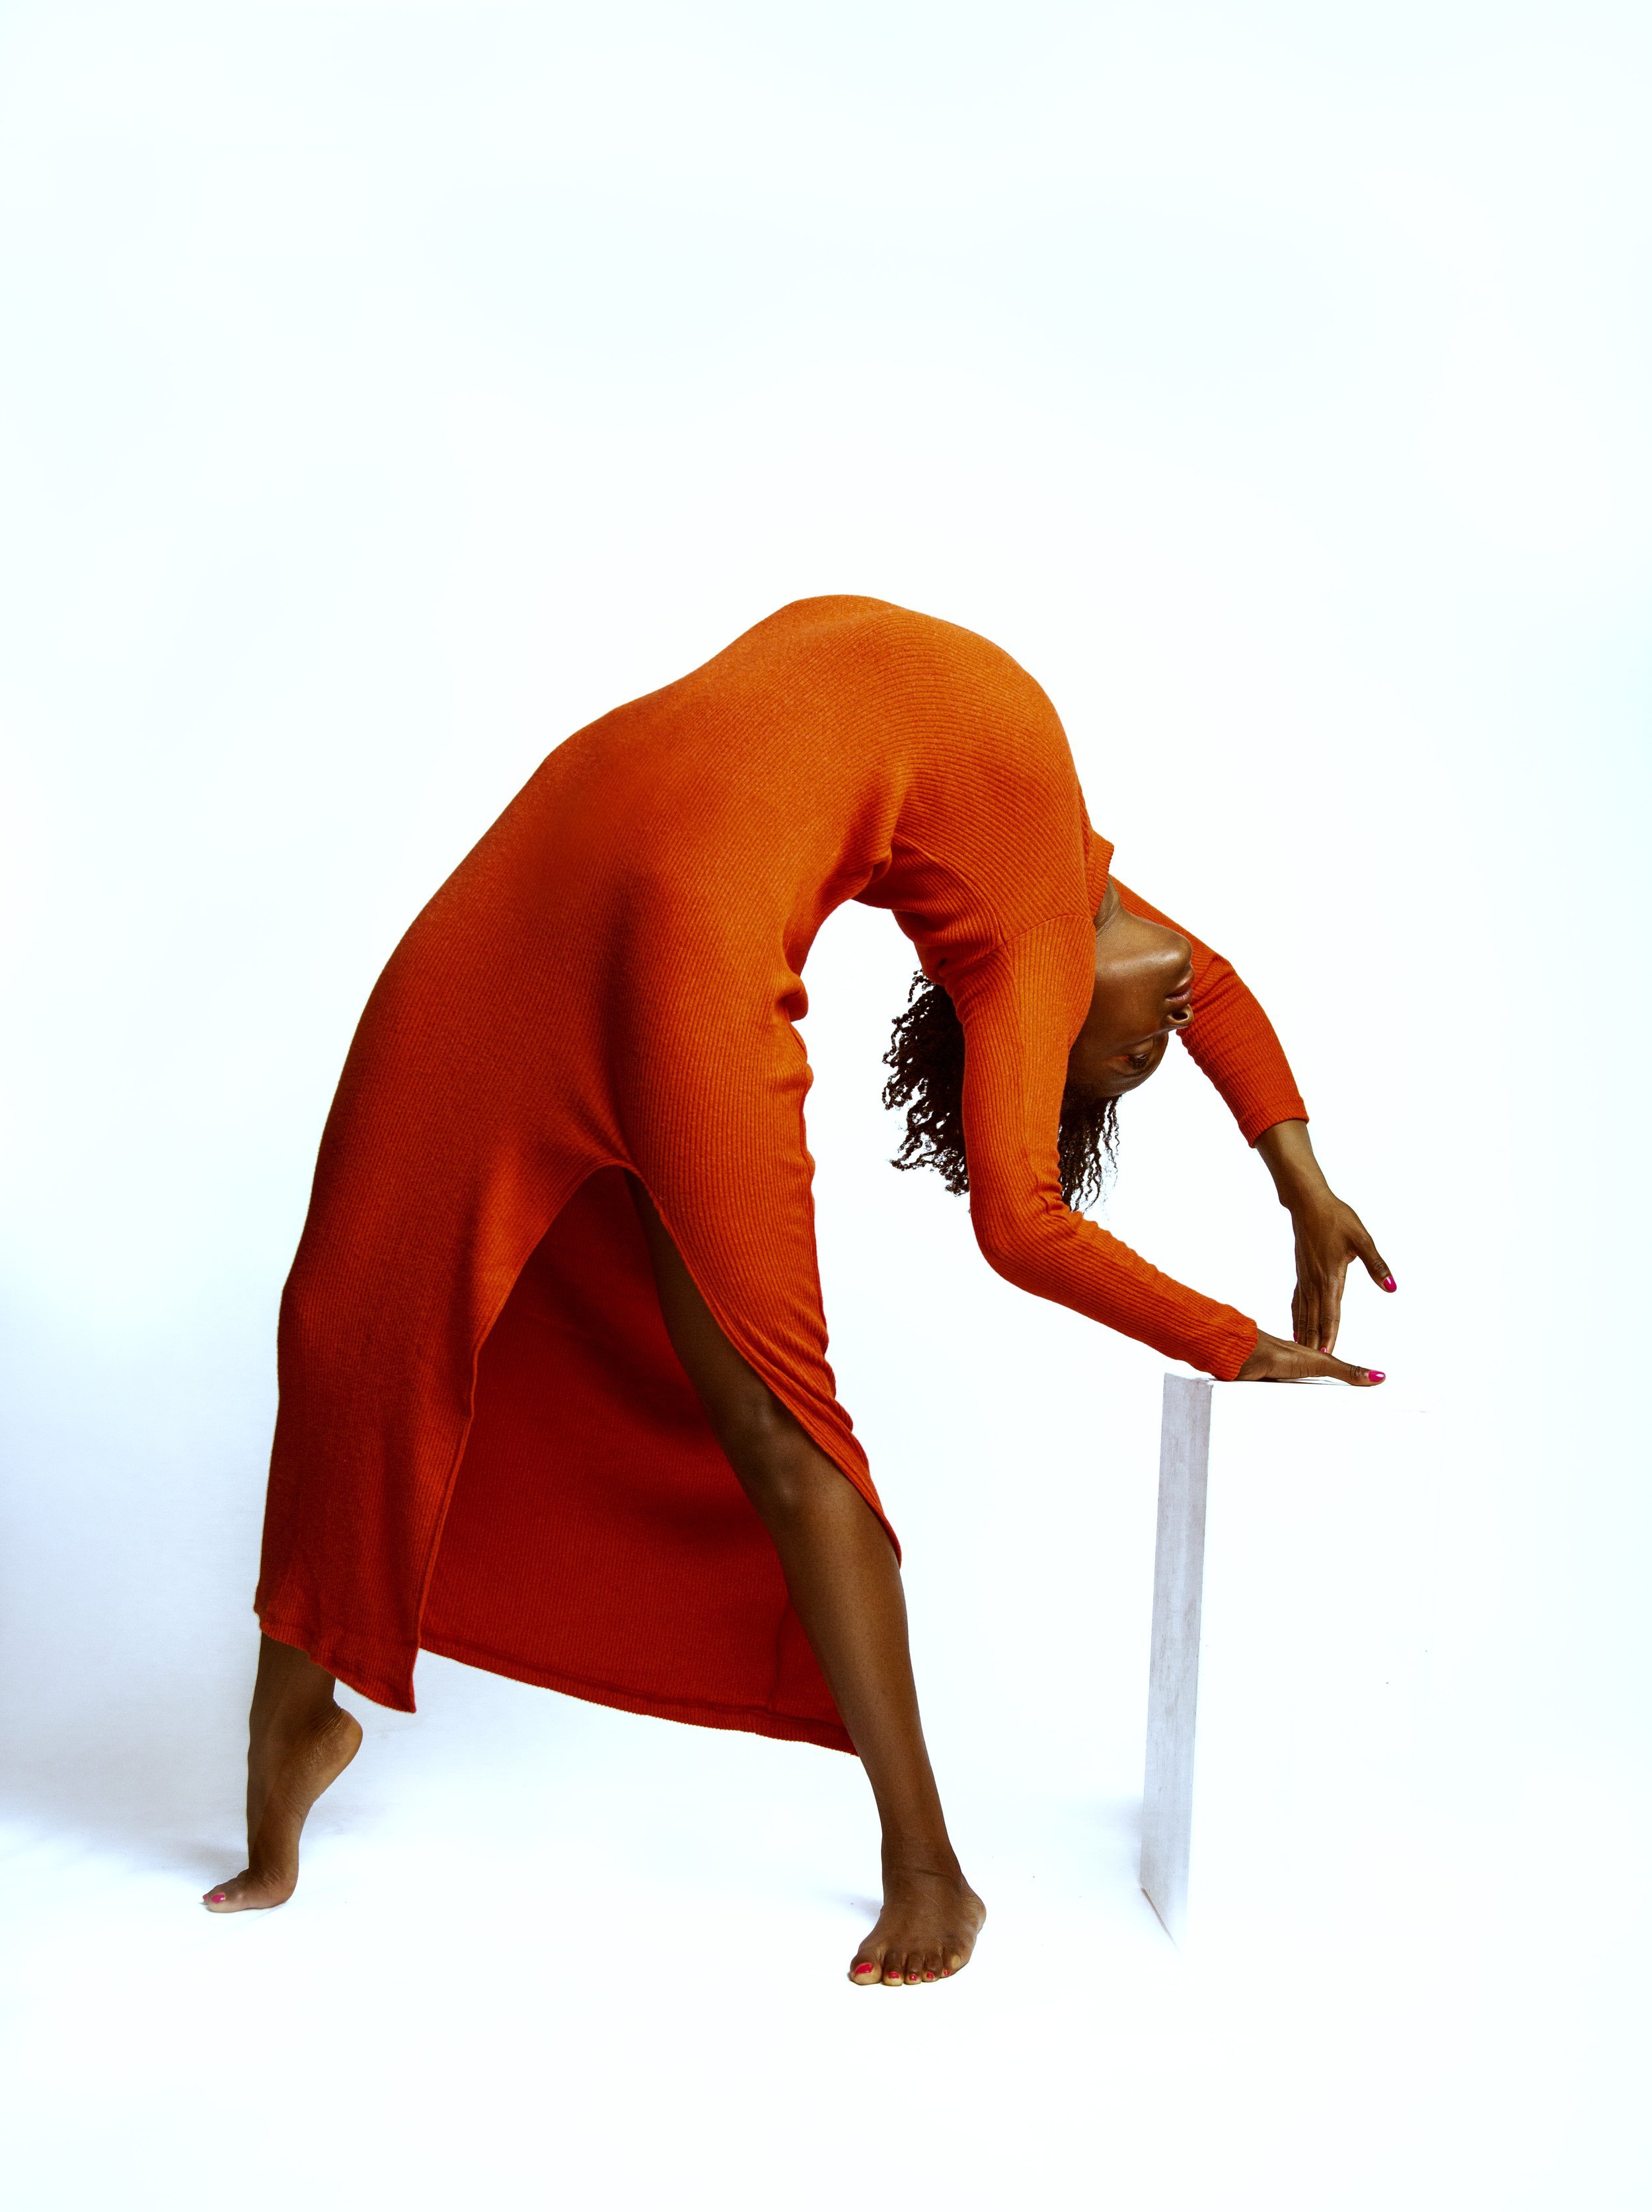 Woman bending backwards onto a posing block during Motion Dance Portrait Session with Beauclair Photography